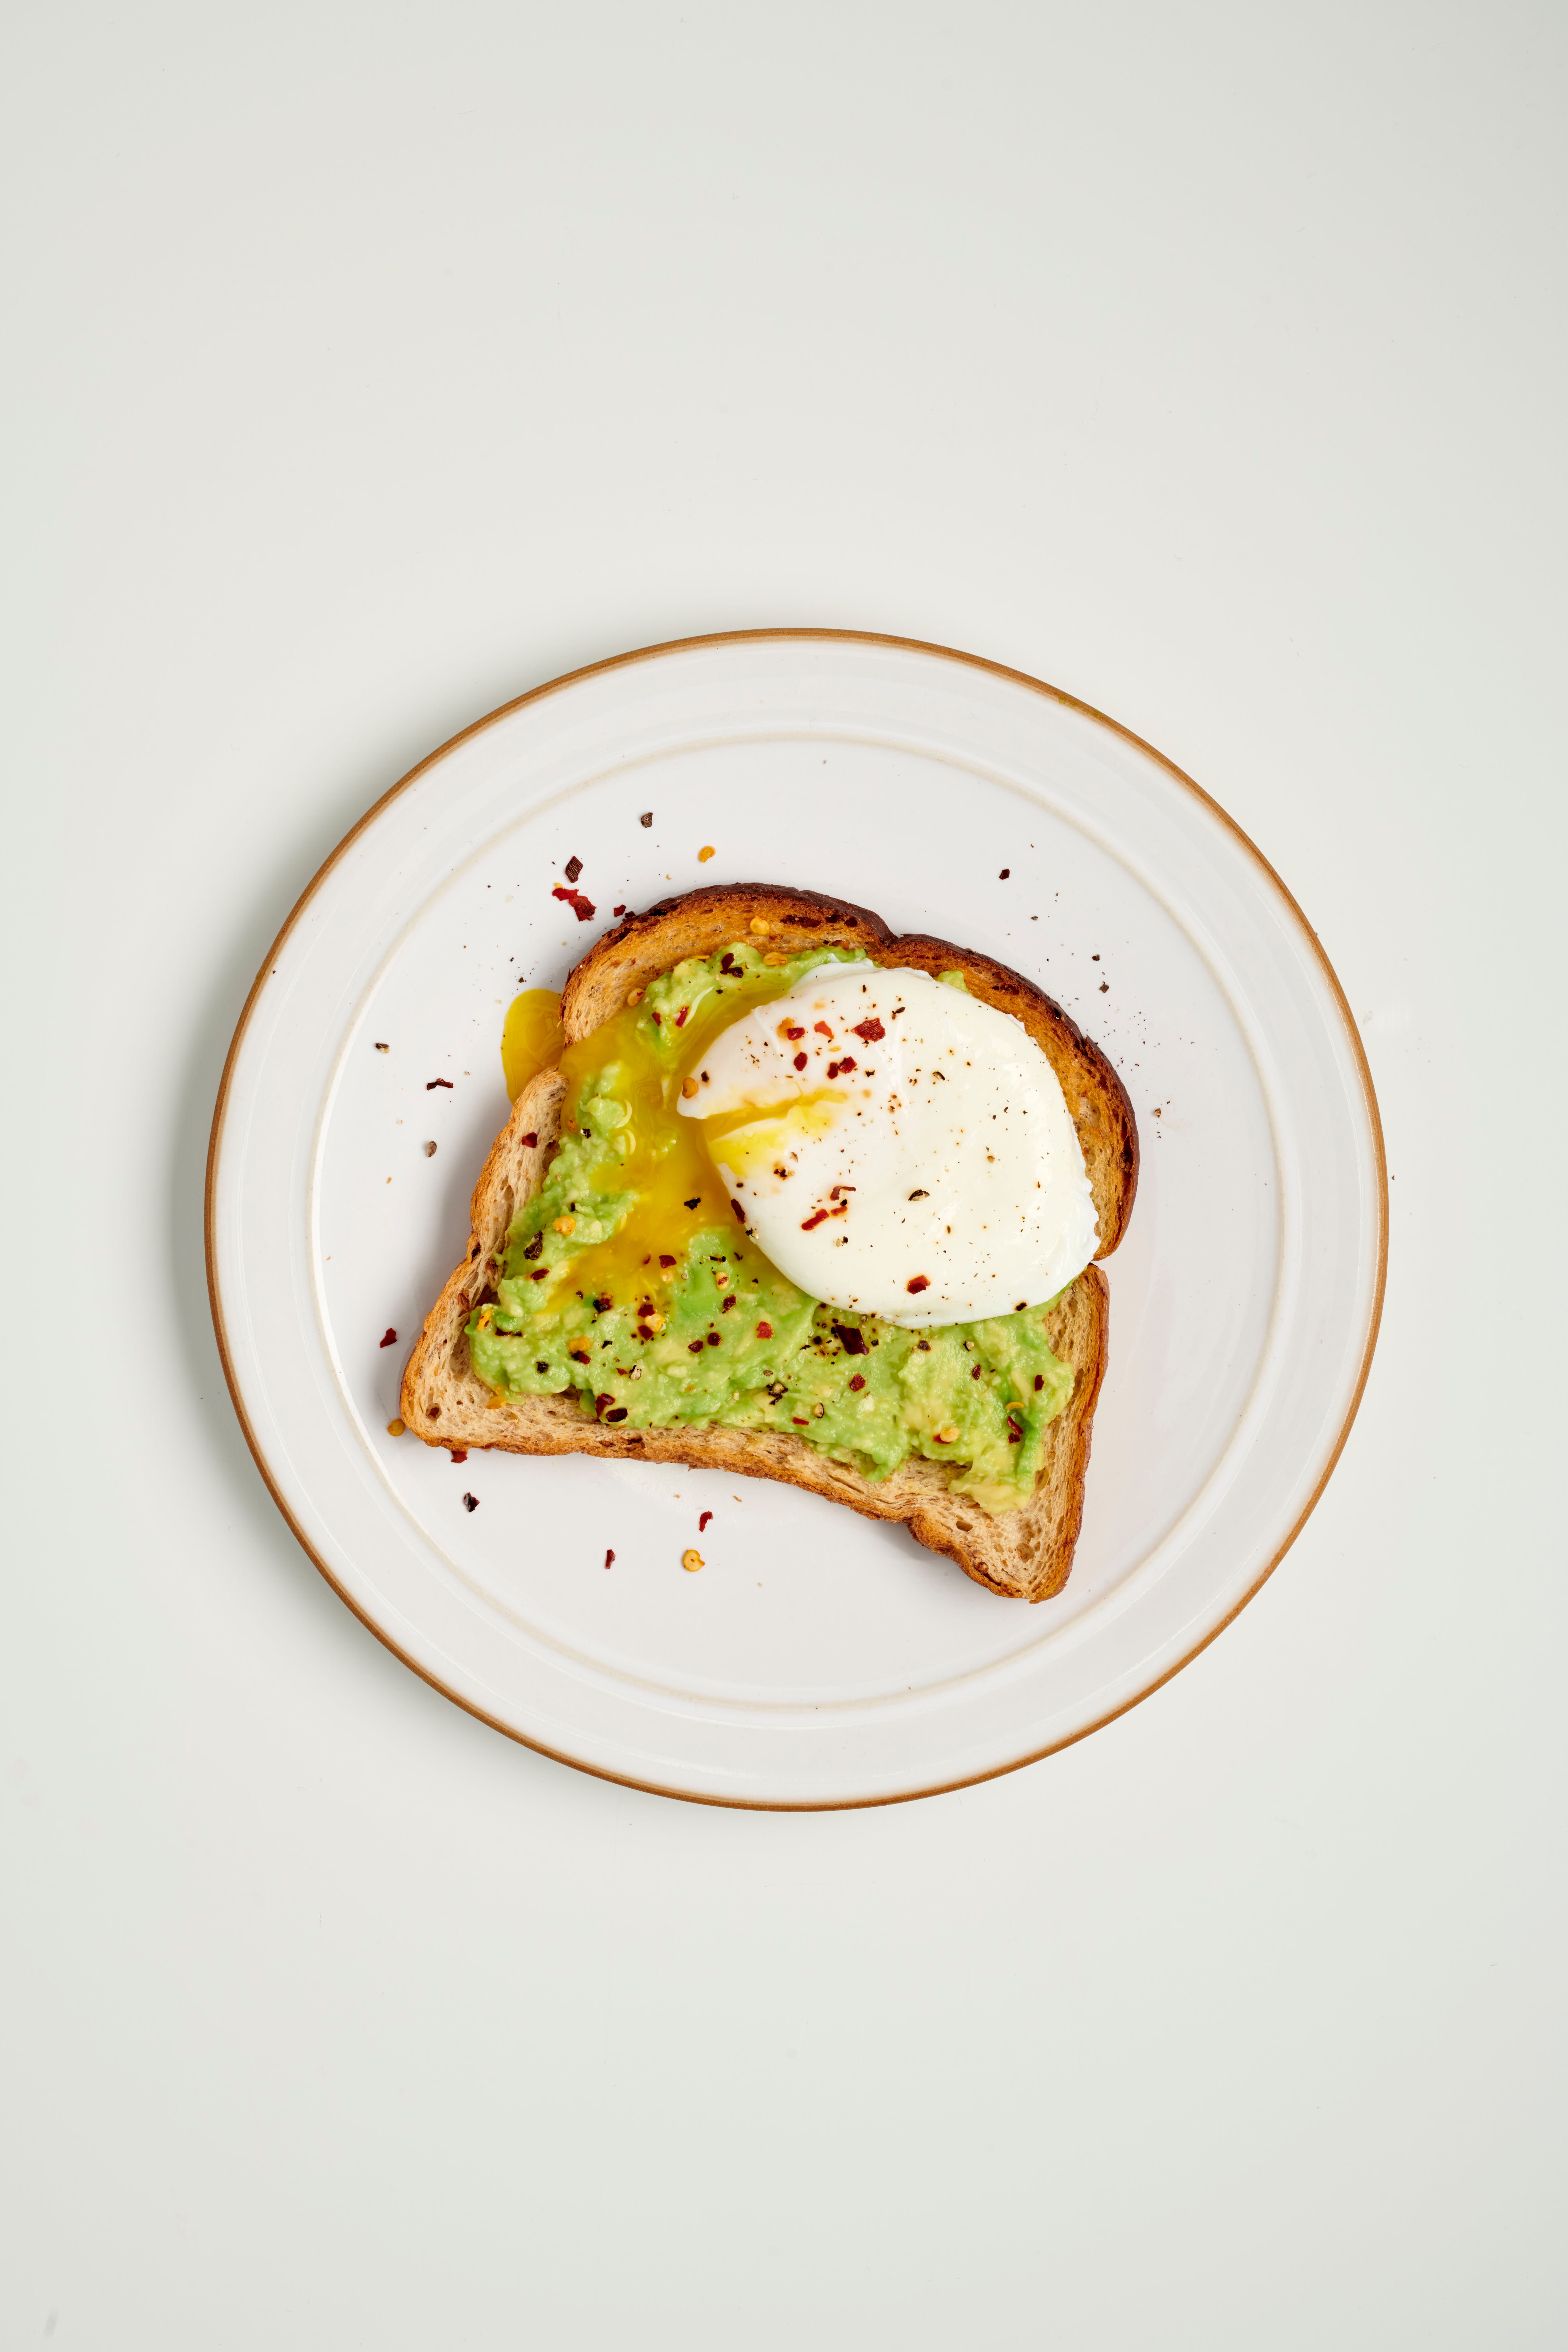 Photo of Poached egg & avocado on toast by WW